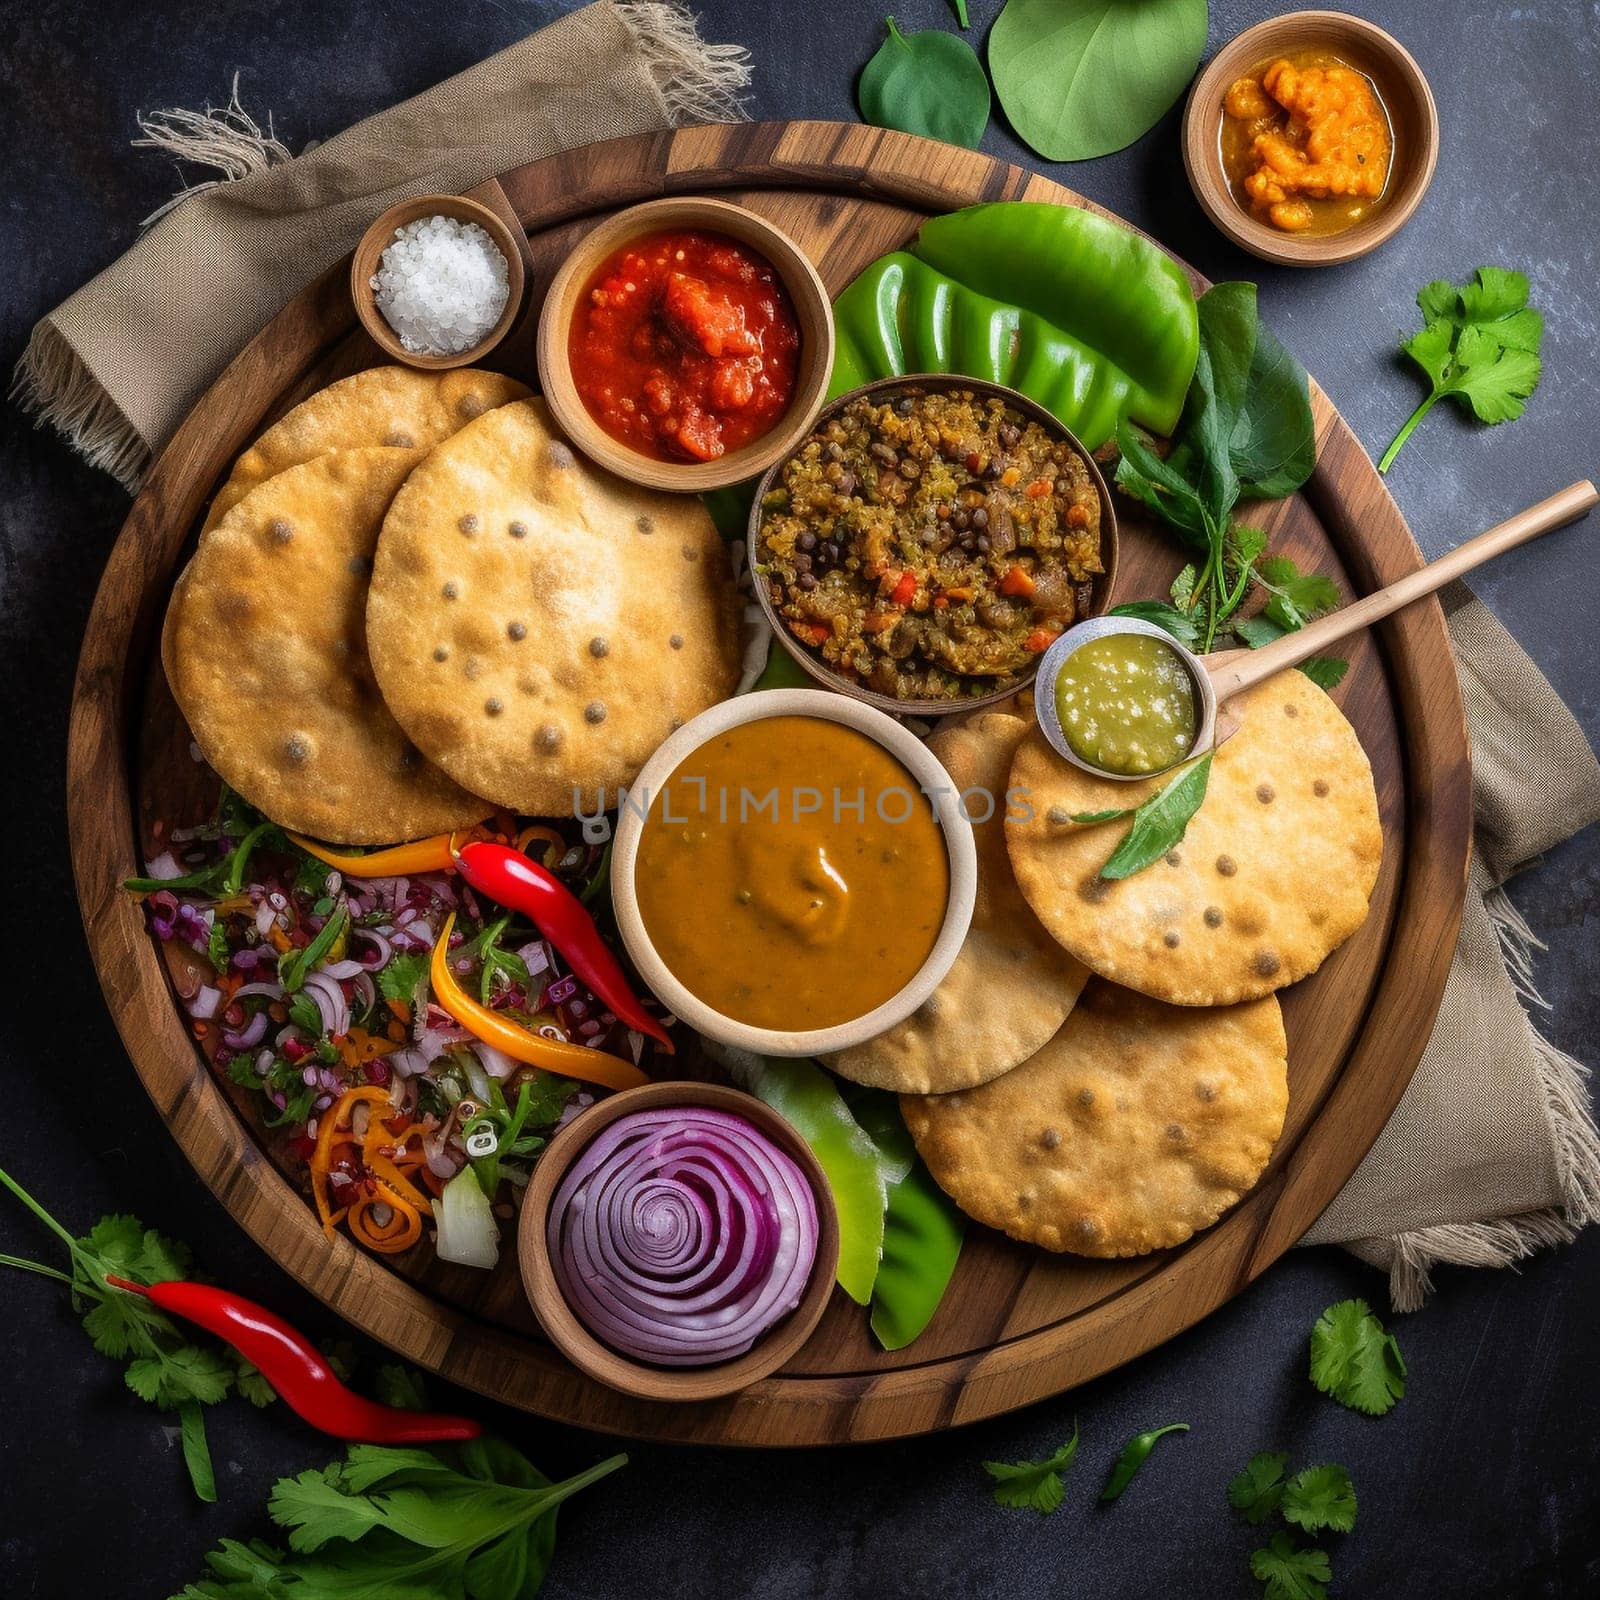 Plate of freshly made Mauritius' Dholl Puri with spiced lentils and chutney by Sahin